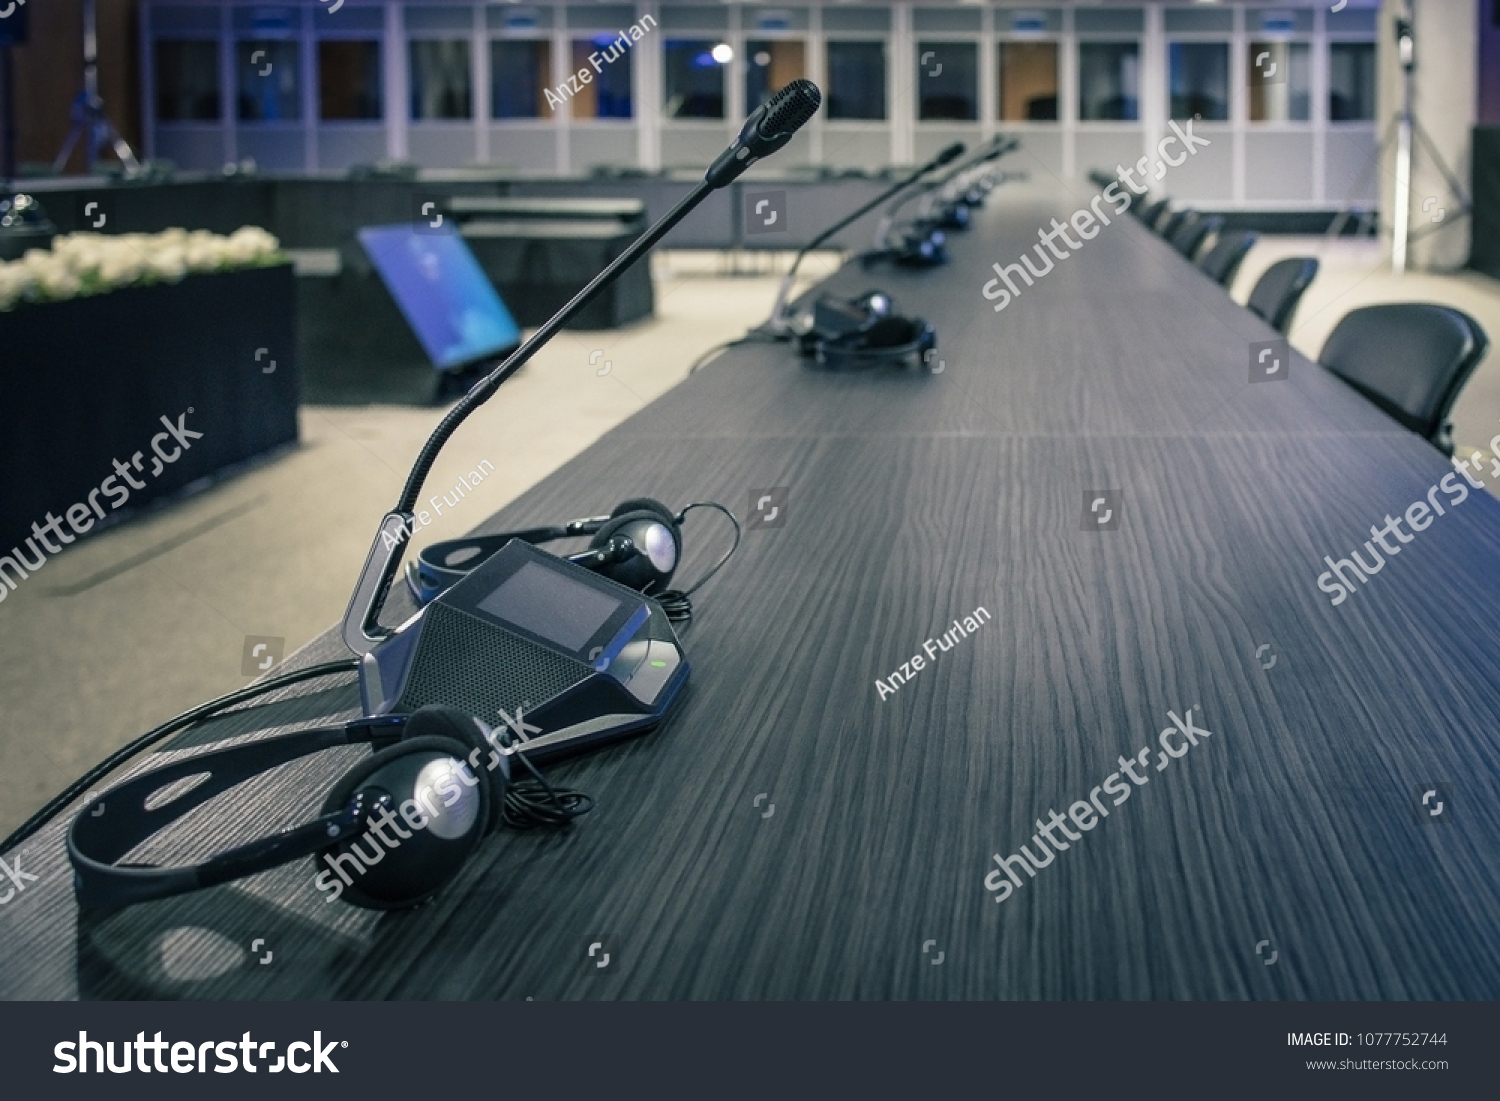 A row of microphone and headphone sets for speech and translation on a business or congress meeting on a desk. Translation booths are seen in the background. #1077752744